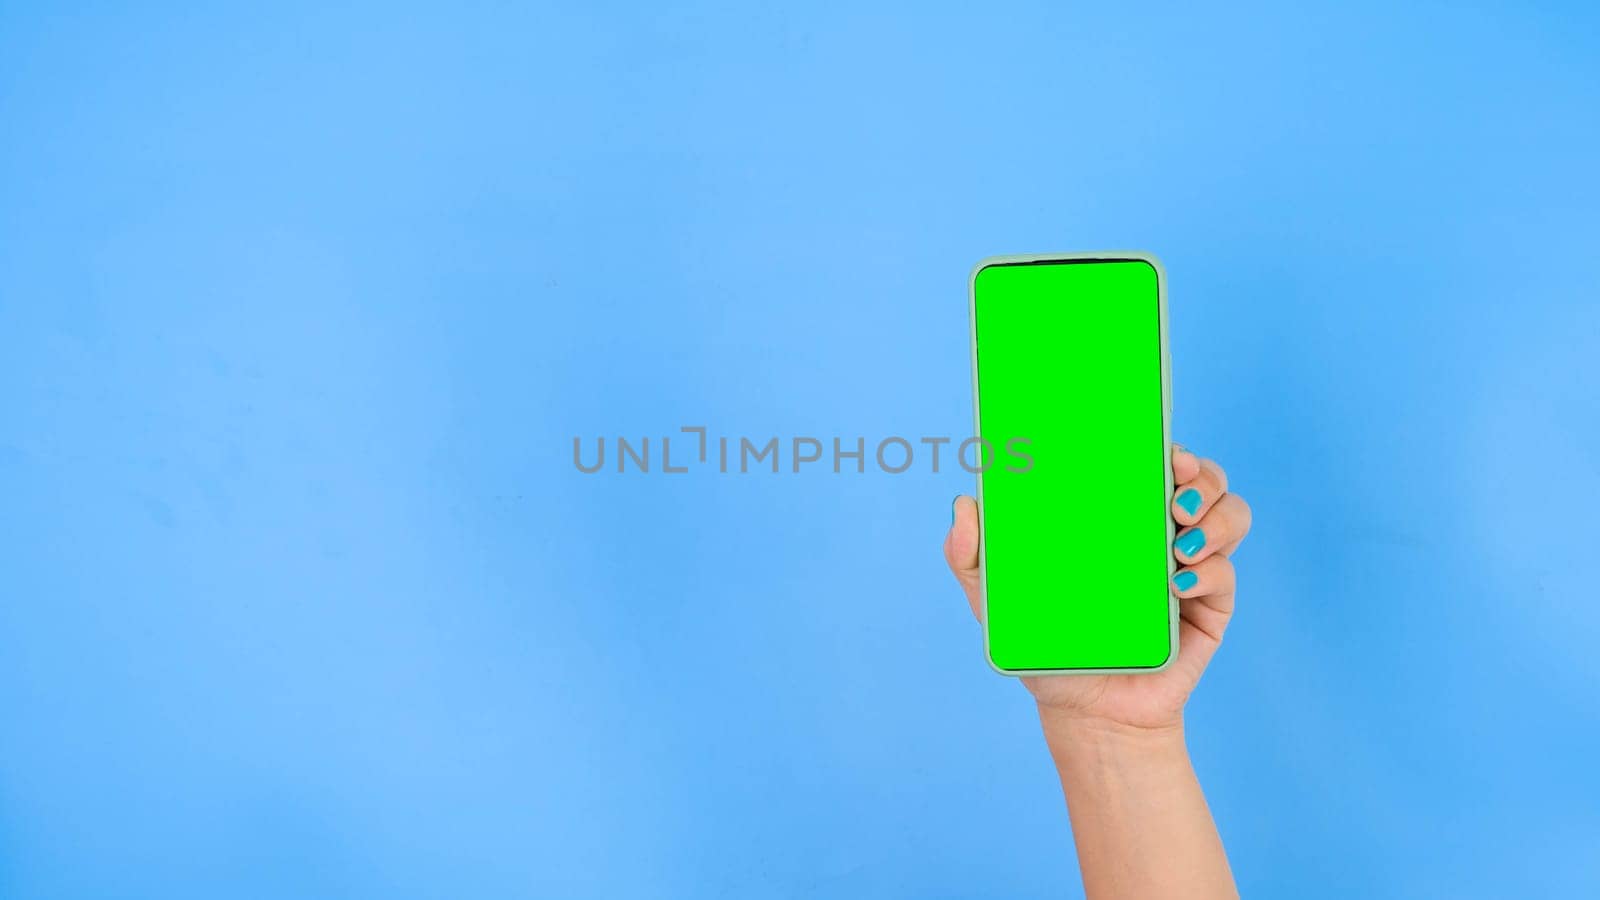 Female hand holding smartphone with mockup green screen on blue background. Close-up woman hand use smartphone with mock-up for Swiping or Watching content. Chroma key mock-up on smartphone in hand.